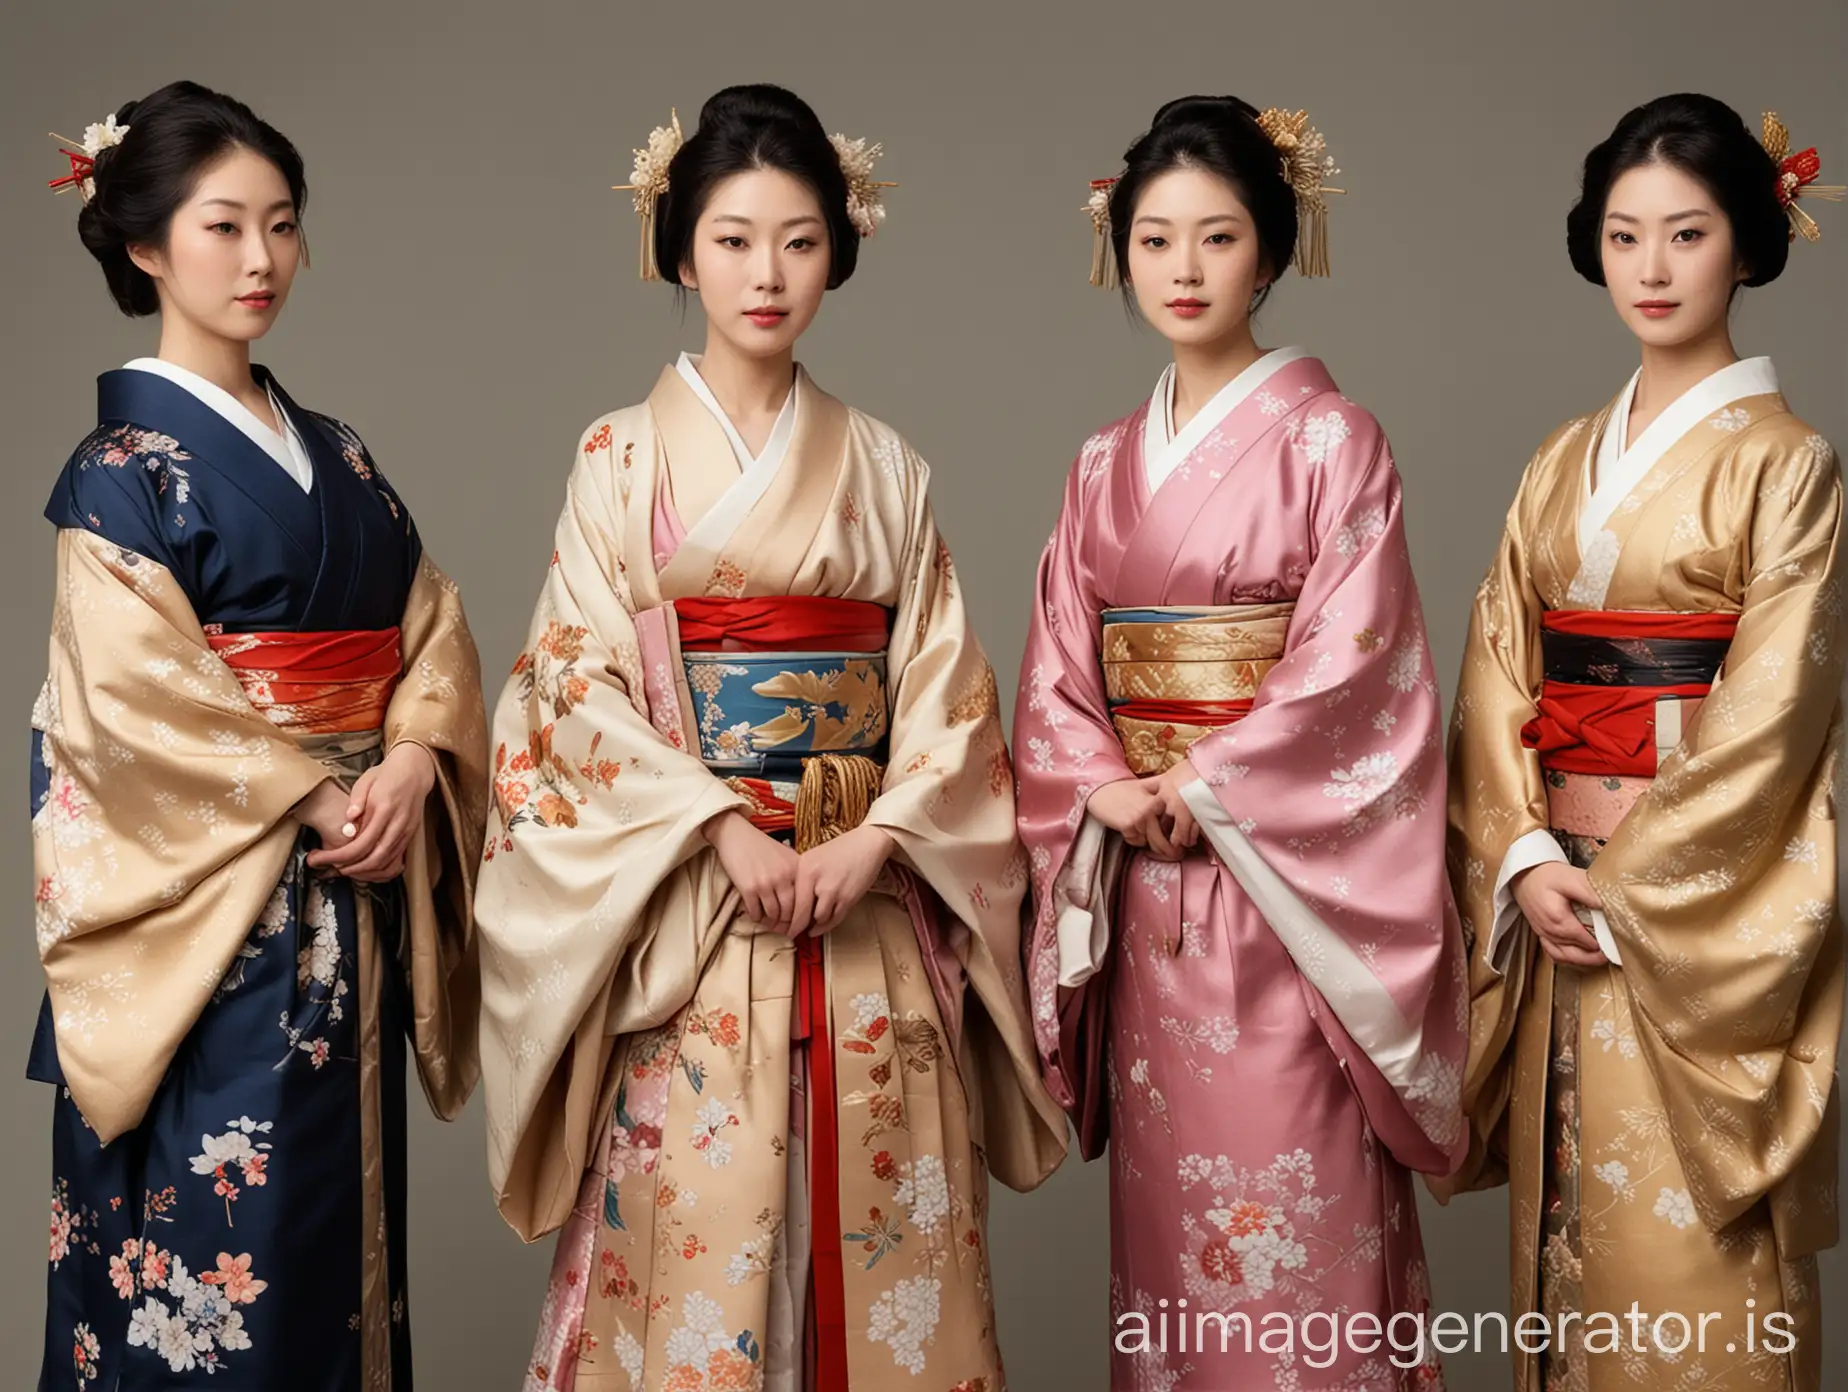 Beautiful, Medieval Era Japanese Noblewoman Group With Shoulderless Kimonos, And Enticing Necklines